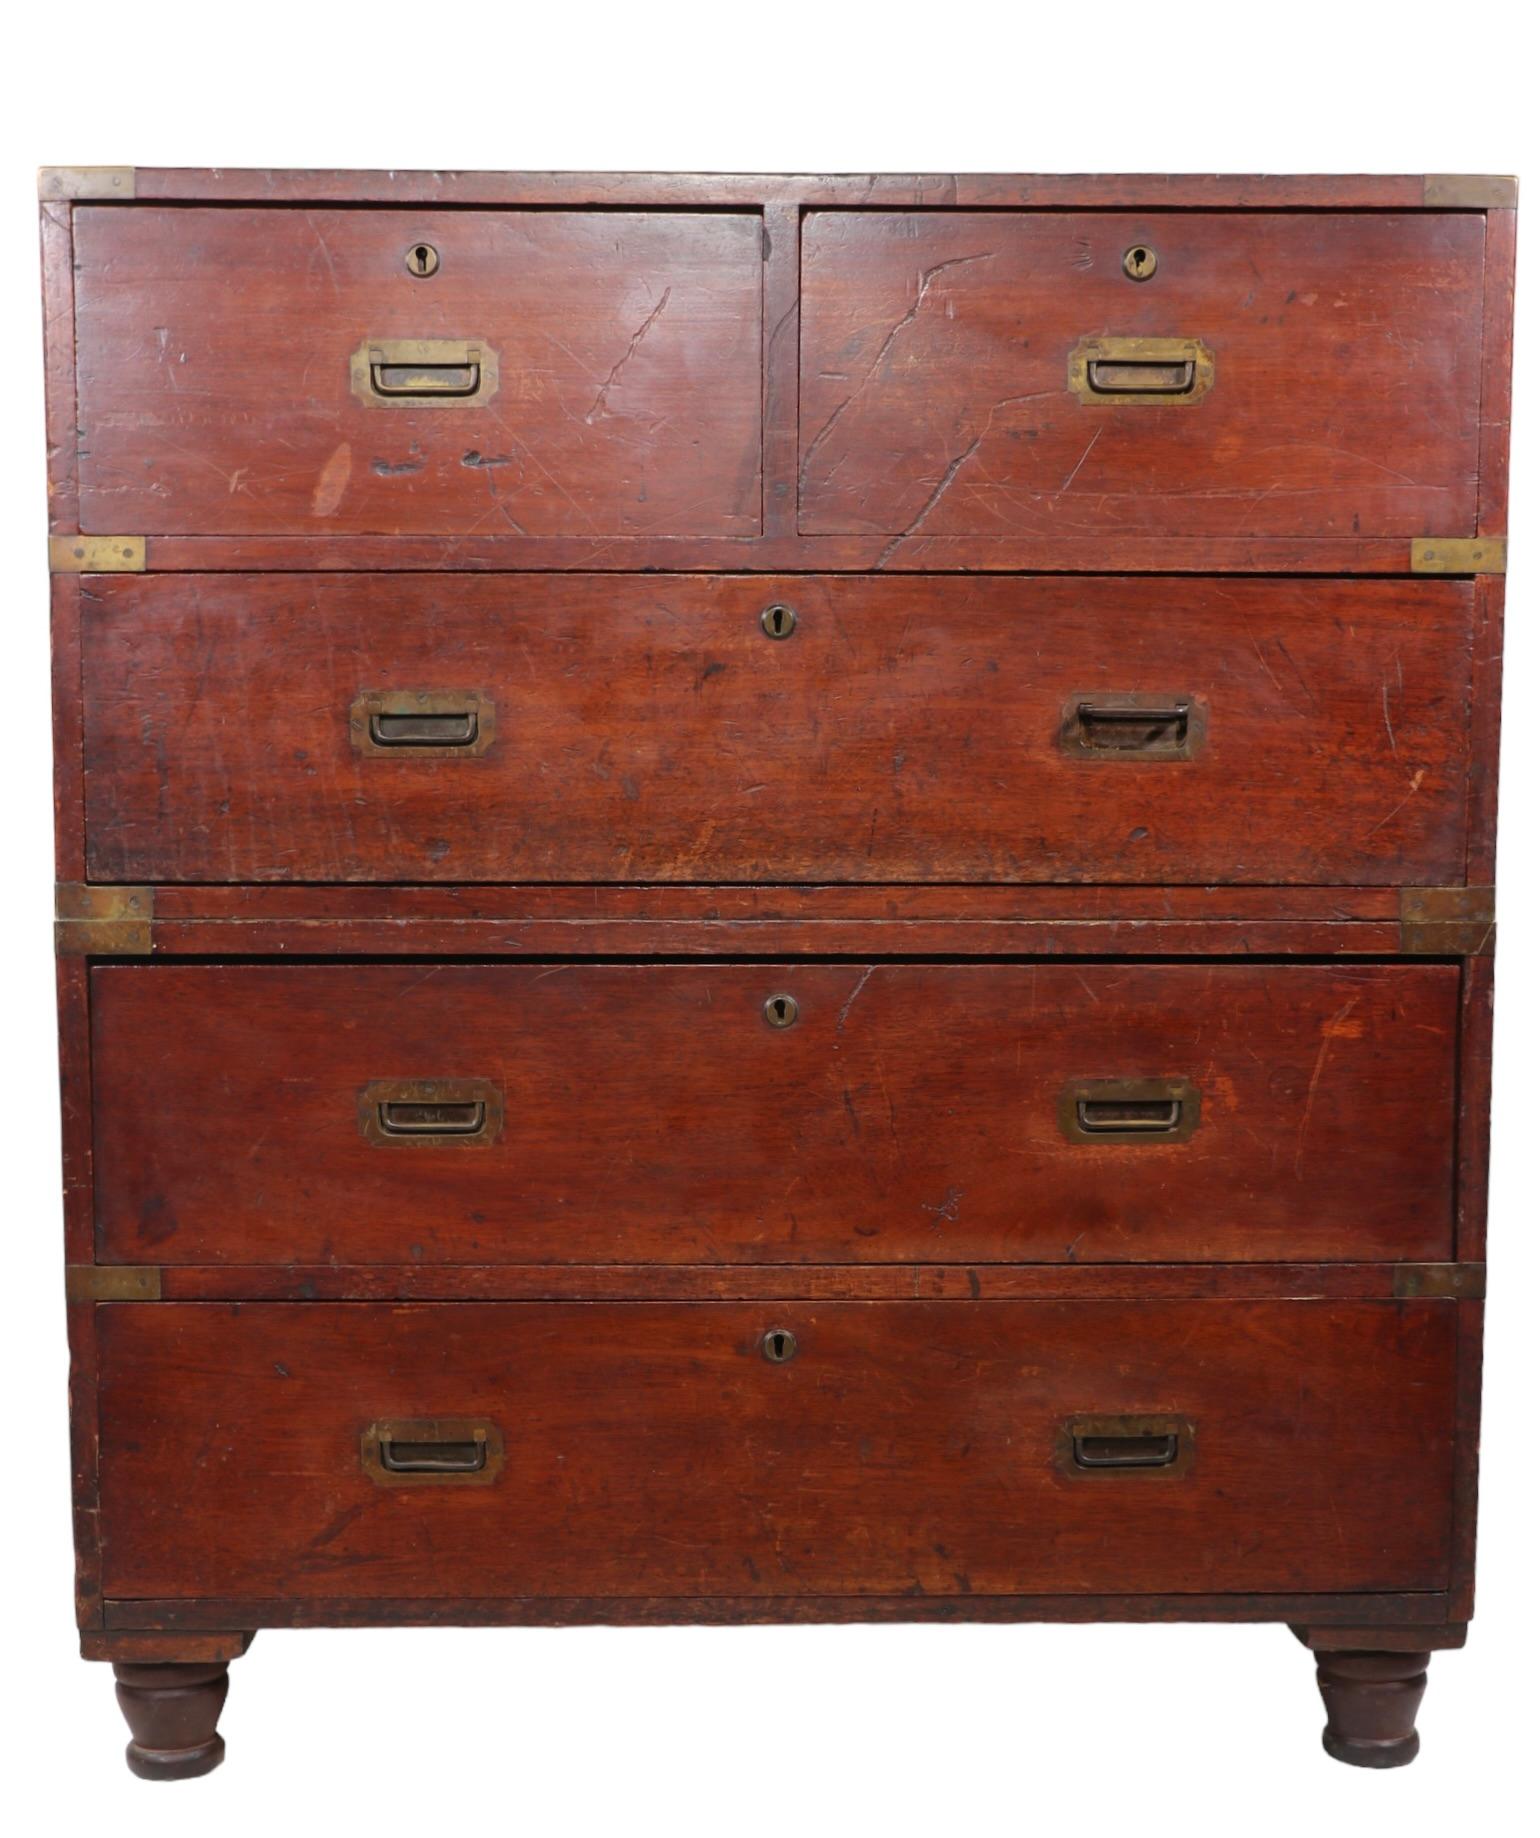 Classic two section Campaign  style chest on chest, constructed of solid wood, with brass bound corners, pulls, and eschews, and heavy iron handles. The chest features an upper section with two smaller drawers, over one larger lower drawer, which